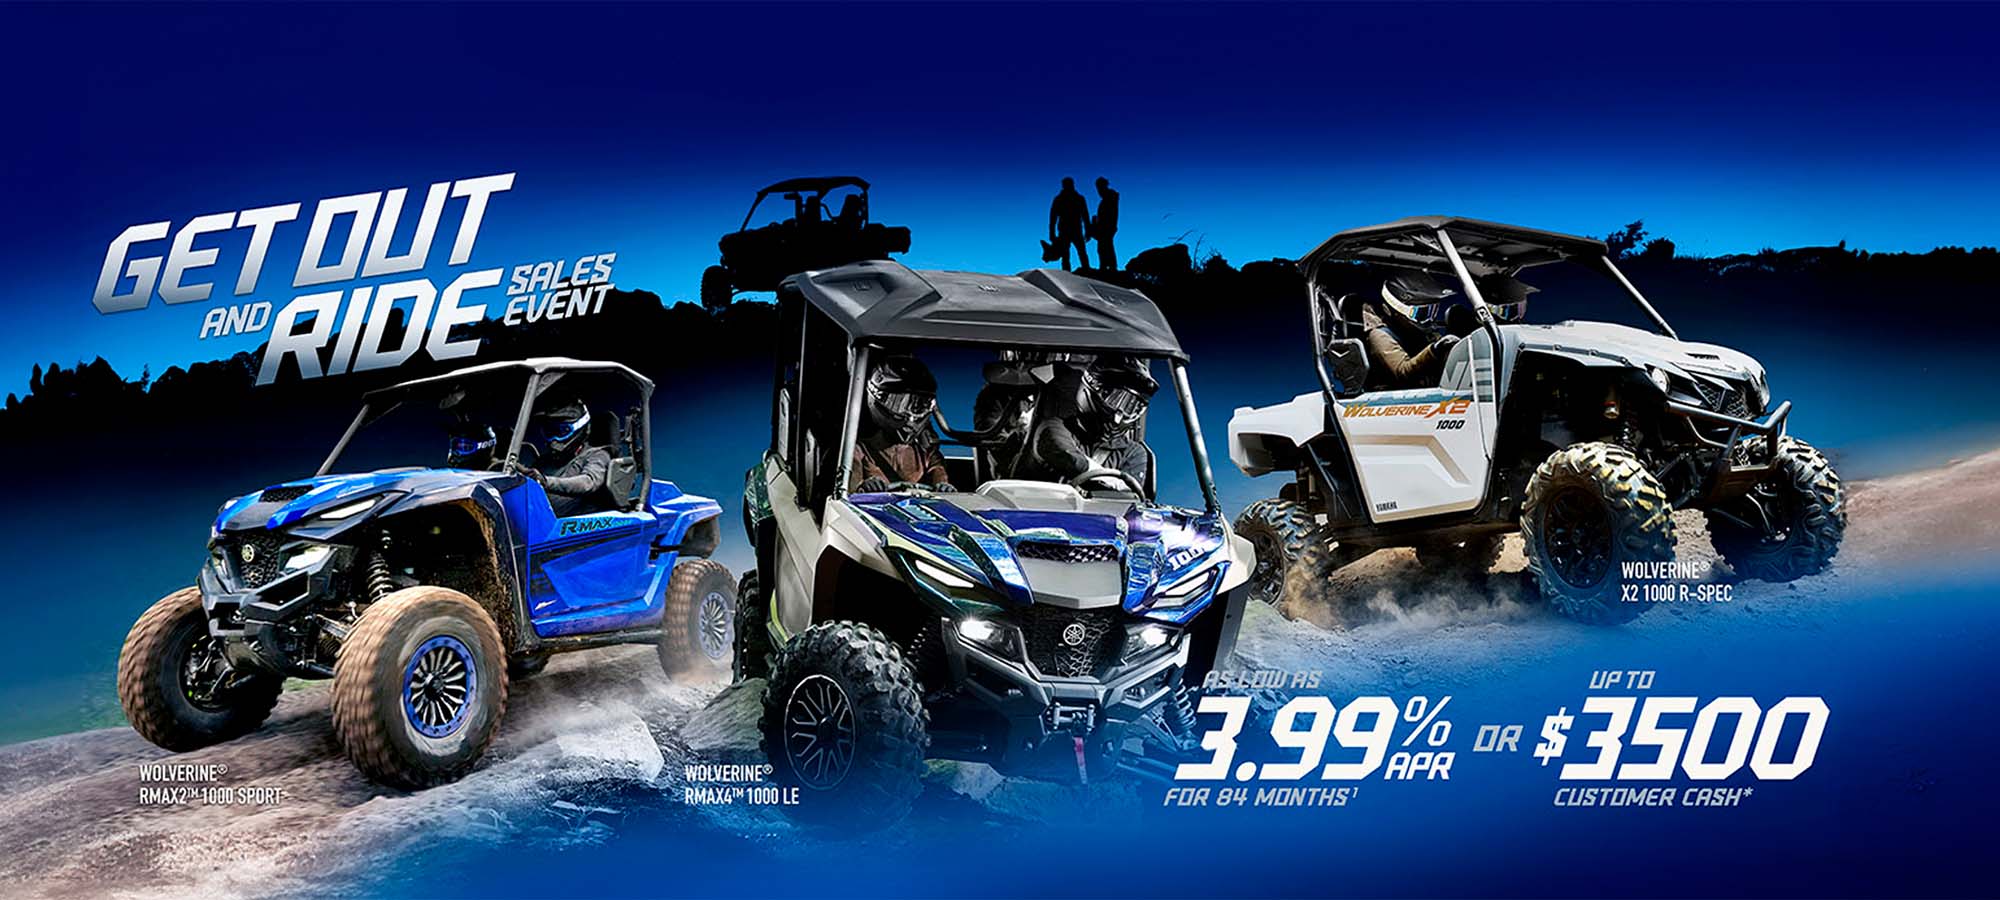 Yamaha US - GET OUT AND RIDE UTV SXS at ATVs and More